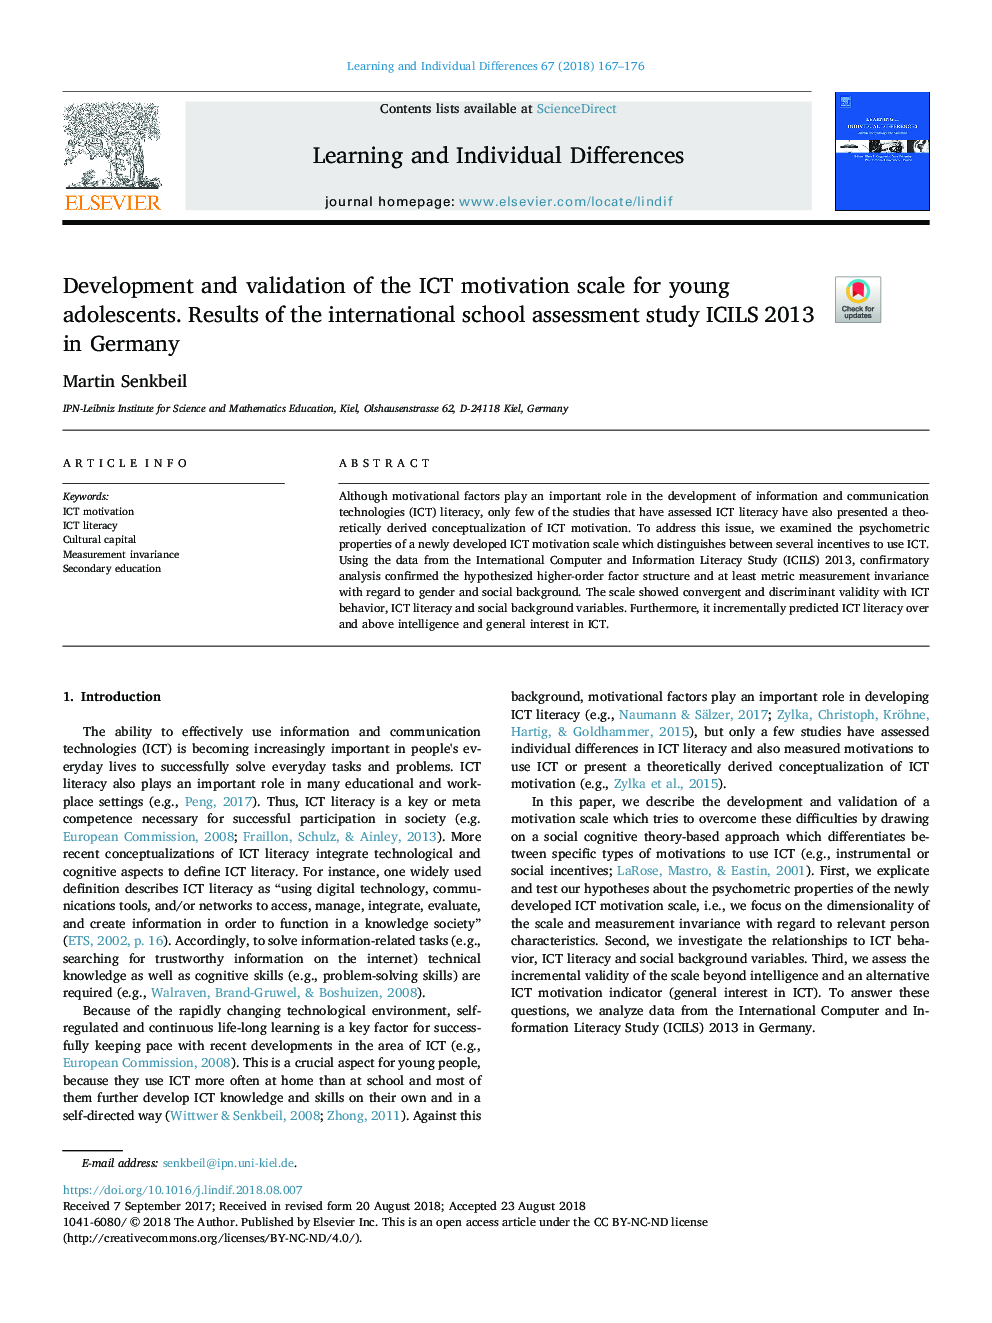 Development and validation of the ICT motivation scale for young adolescents. Results of the international school assessment study ICILS 2013 in Germany